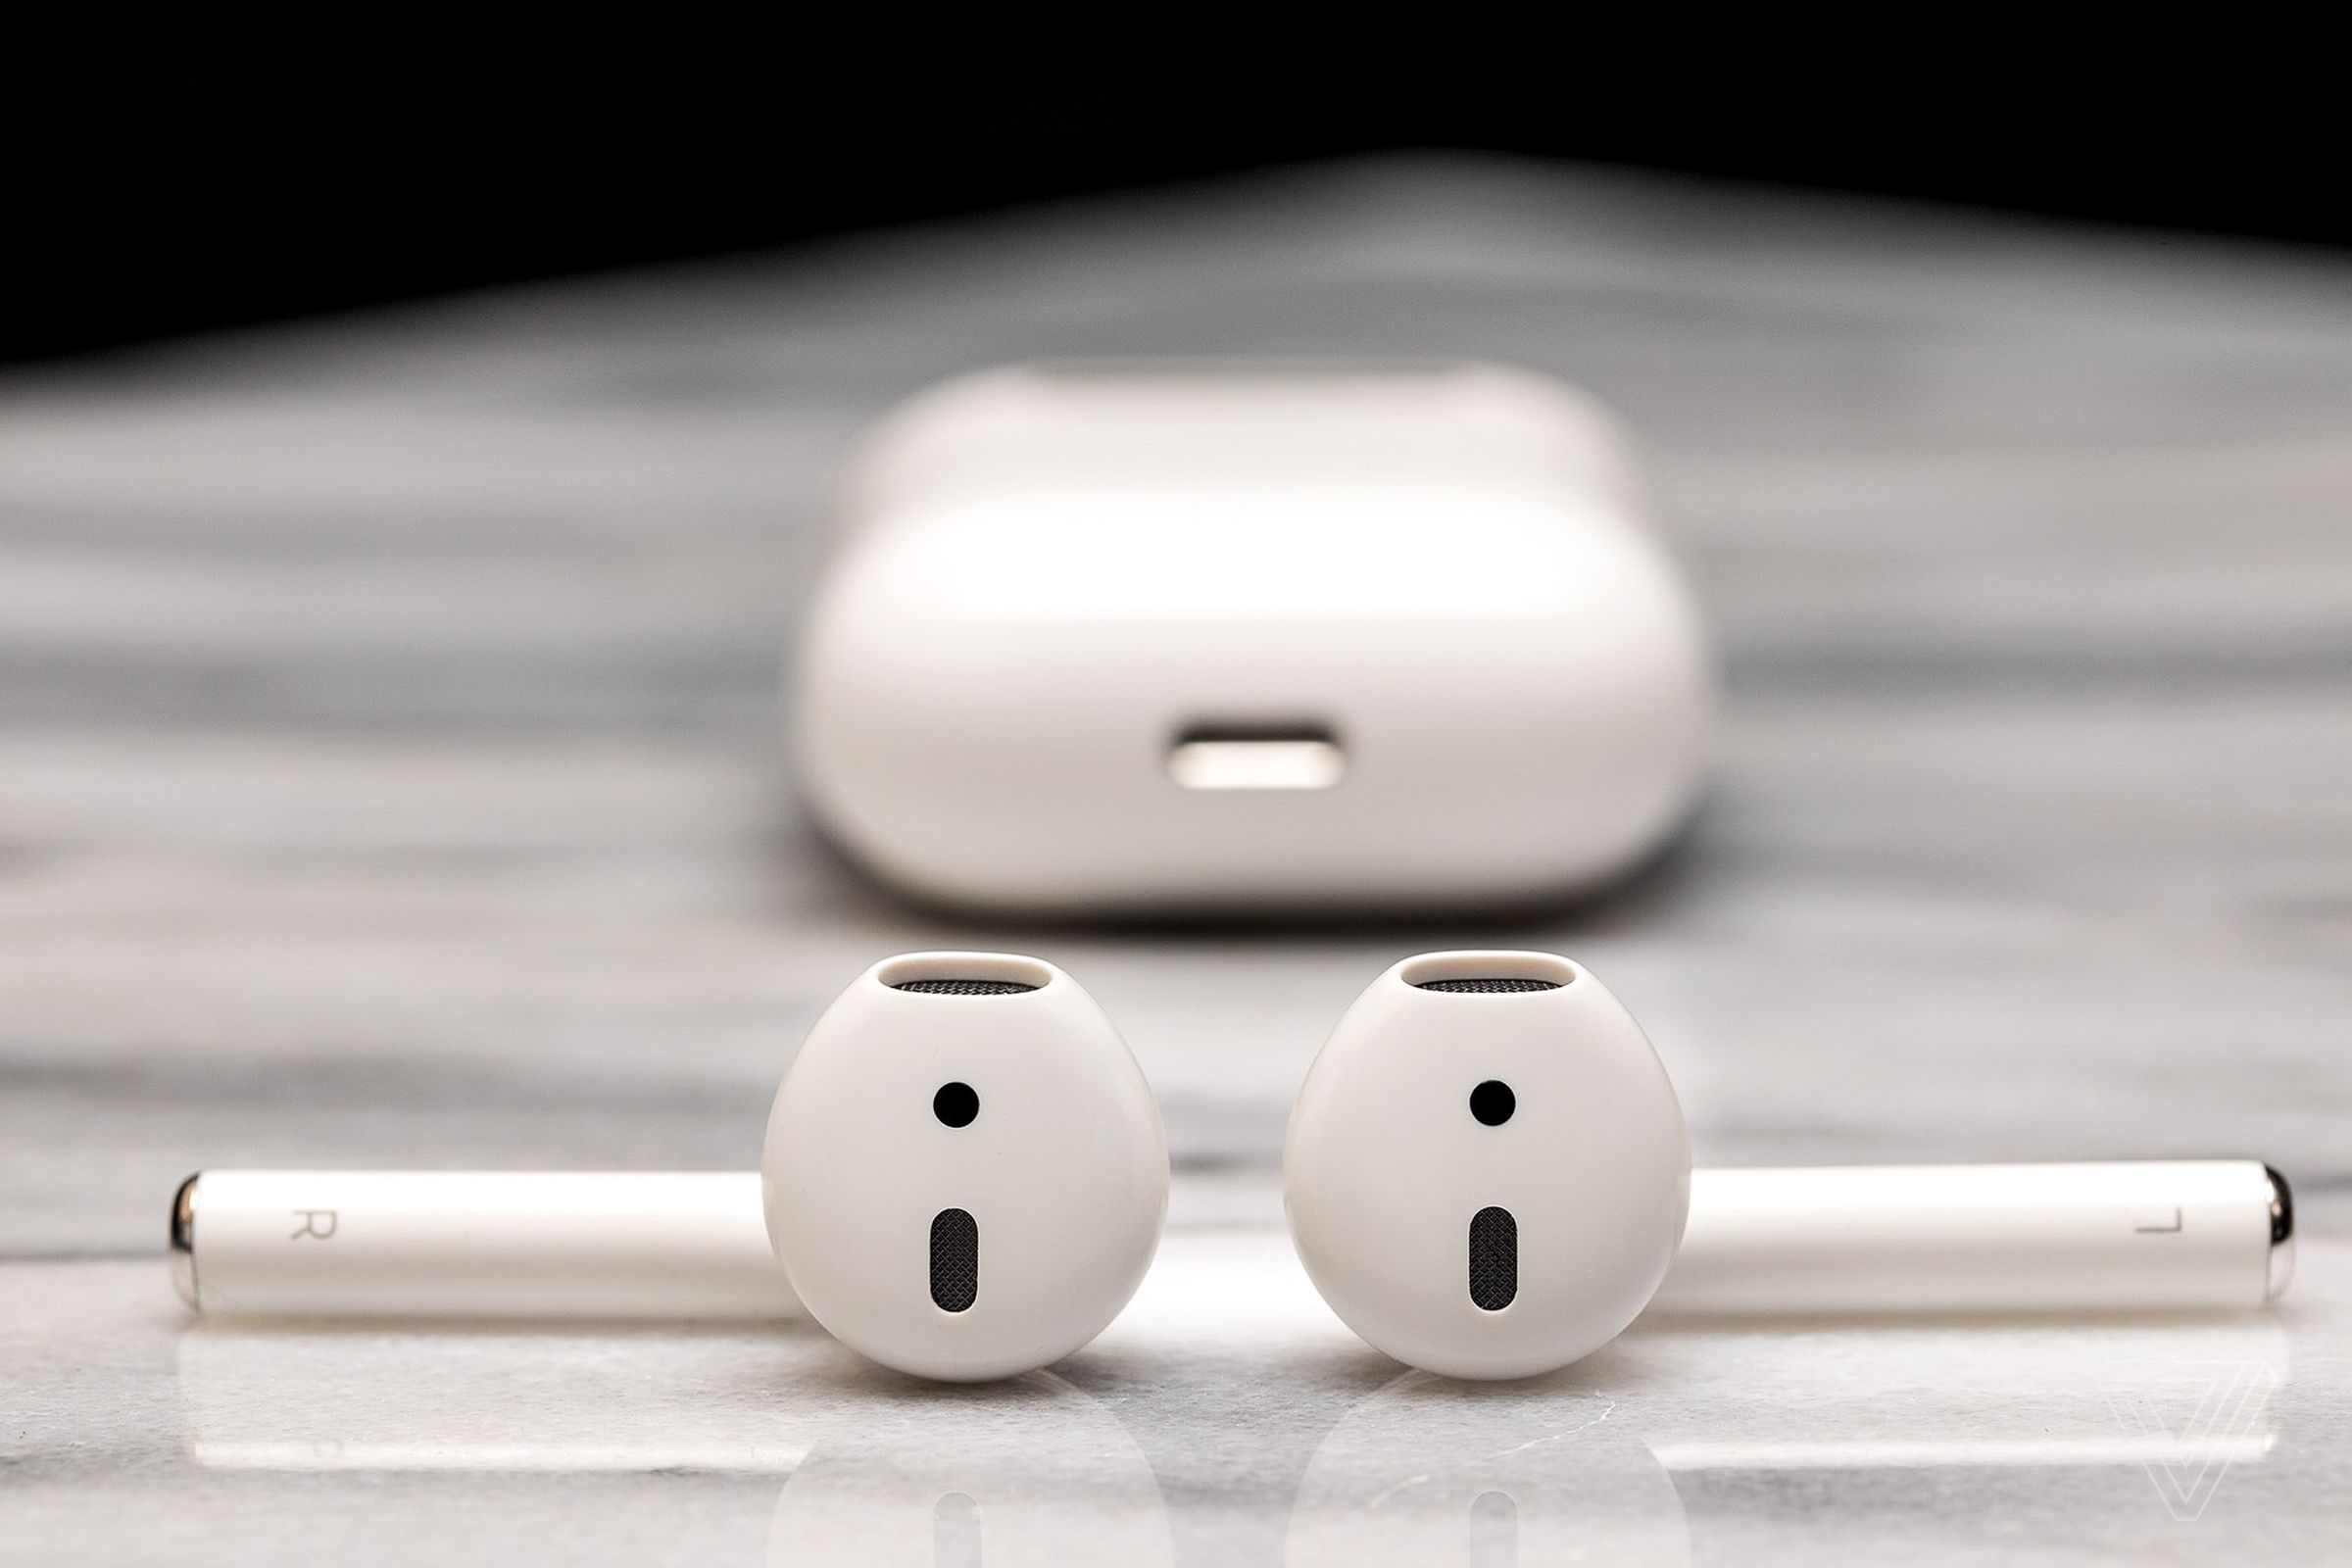 A close-up pictures of a set of second-gen Apple AirPods on a marble tabletop. Their charging case is set behind them, blurred out of focus, with its bottom Lightning port visible.